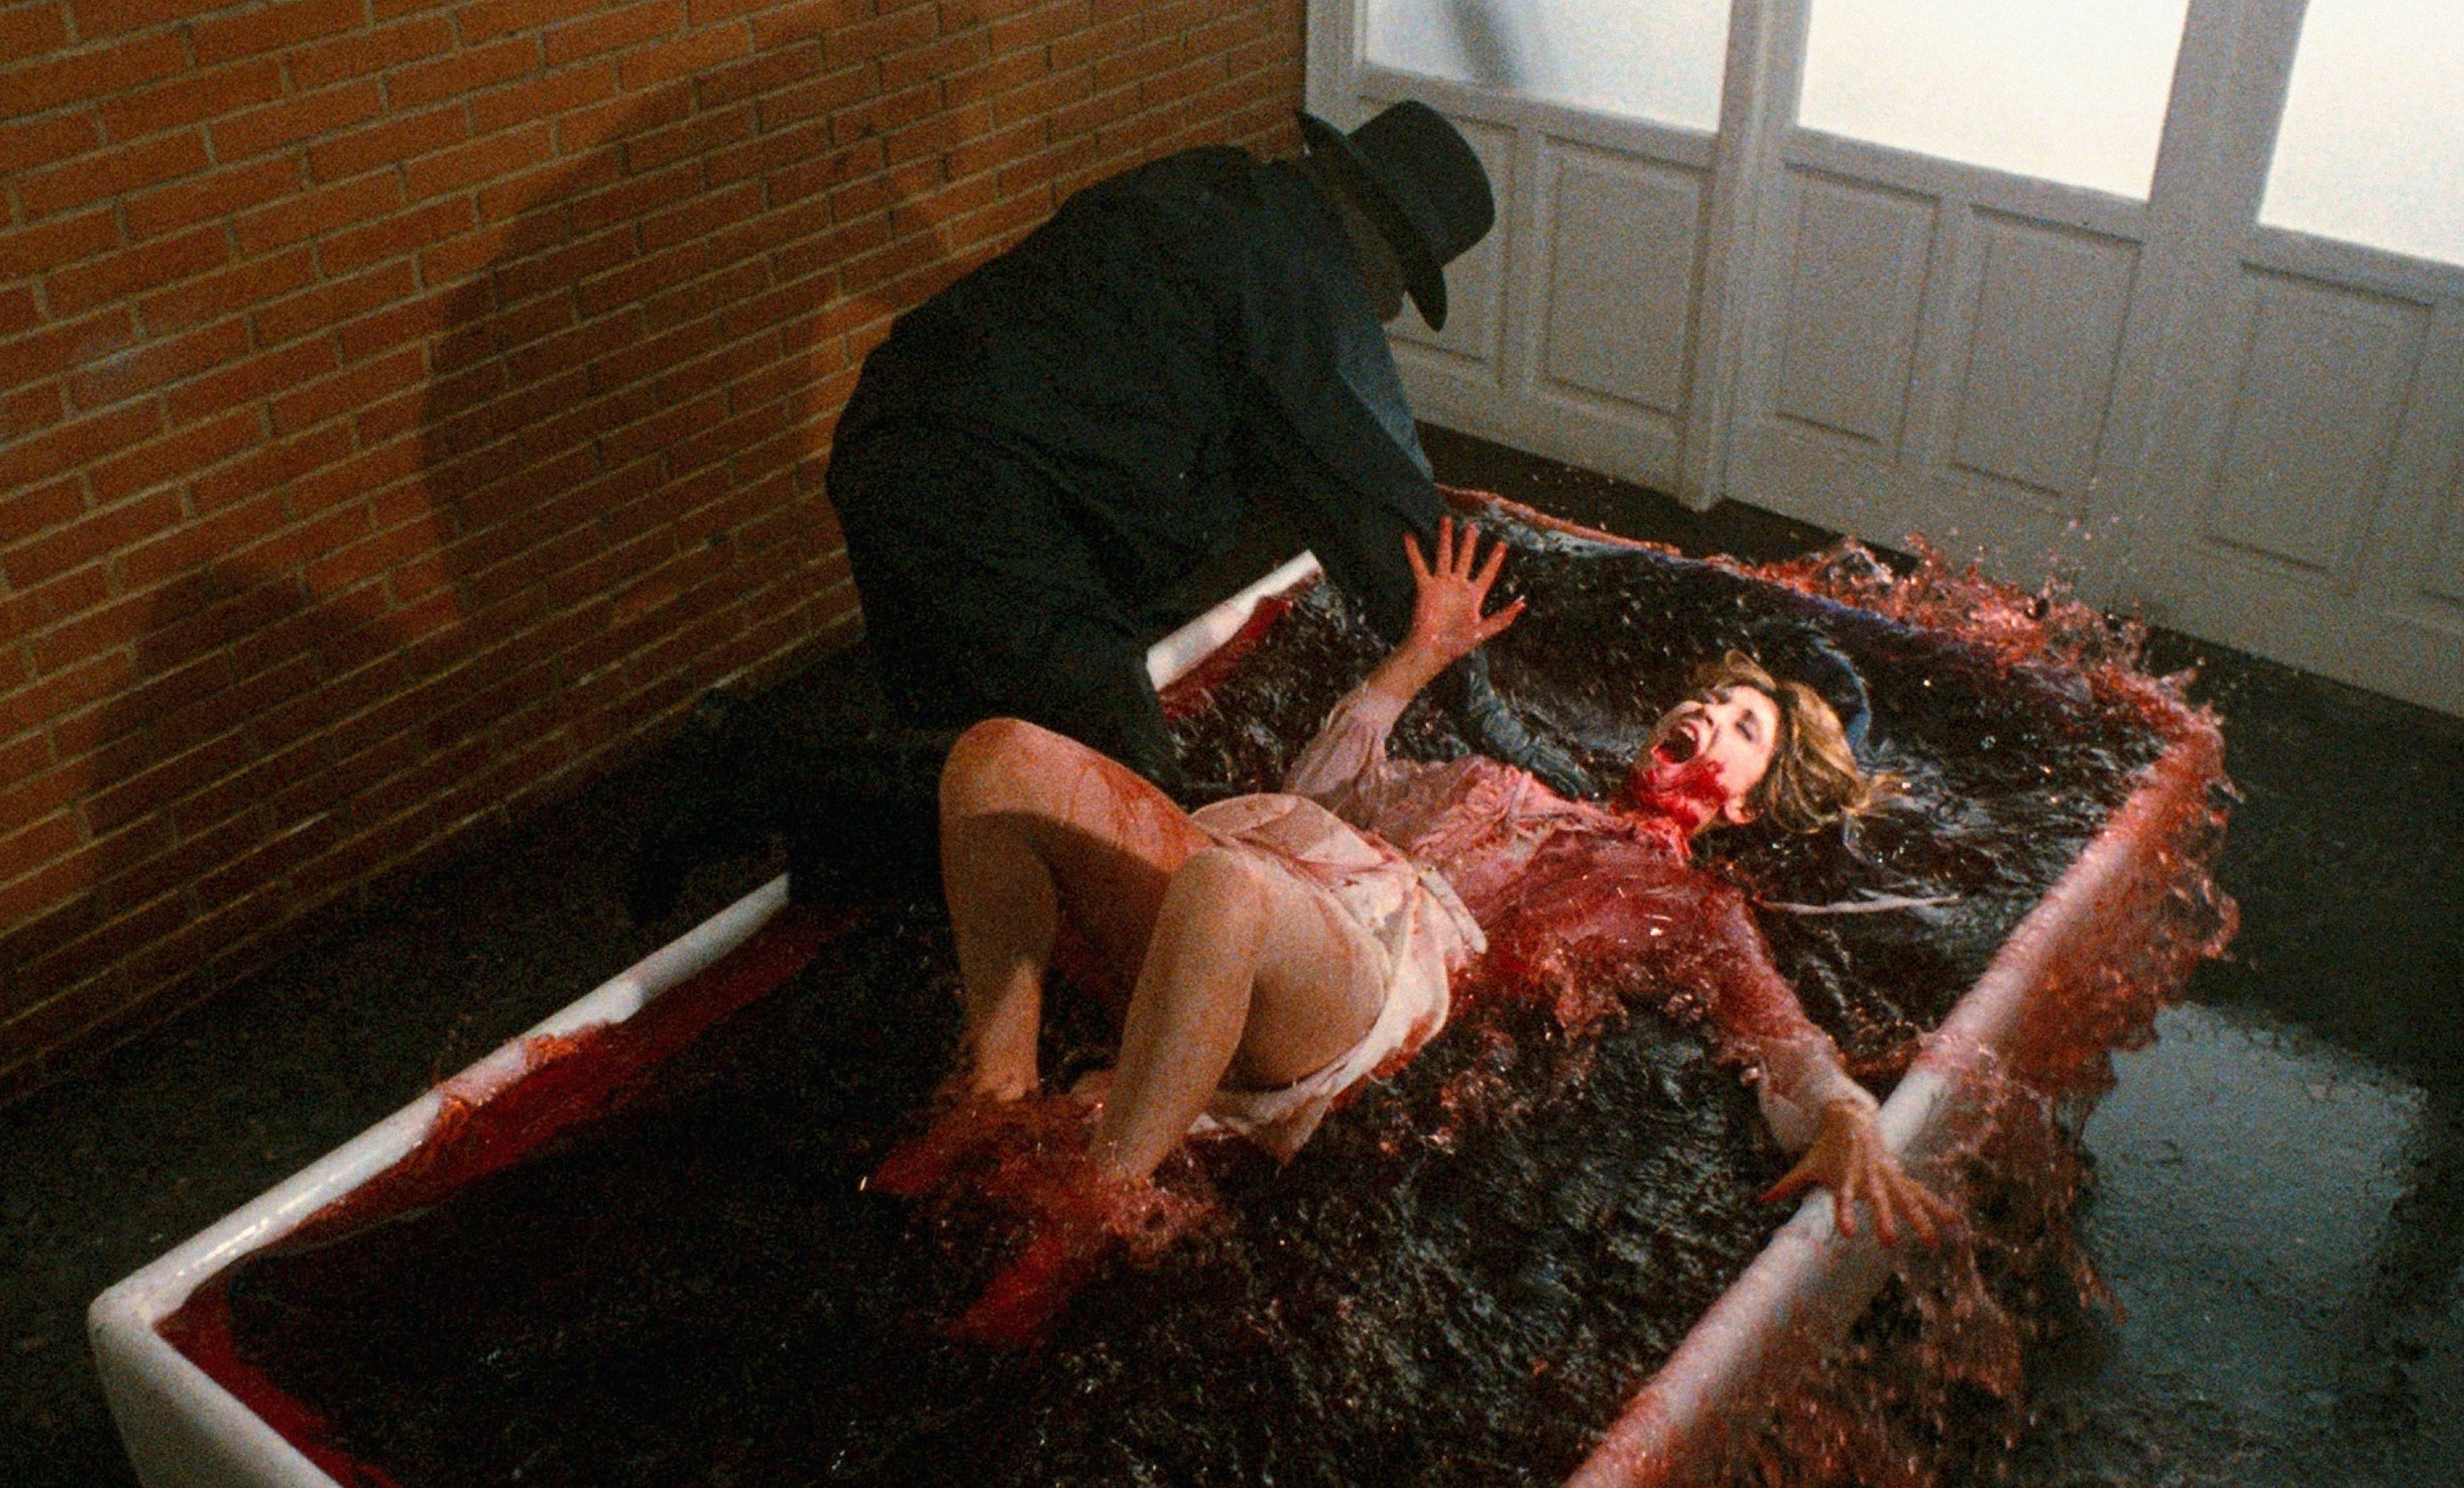 A mysterious figure dumps a woman into a literal pool of blood in &quot;Pieces&quot;